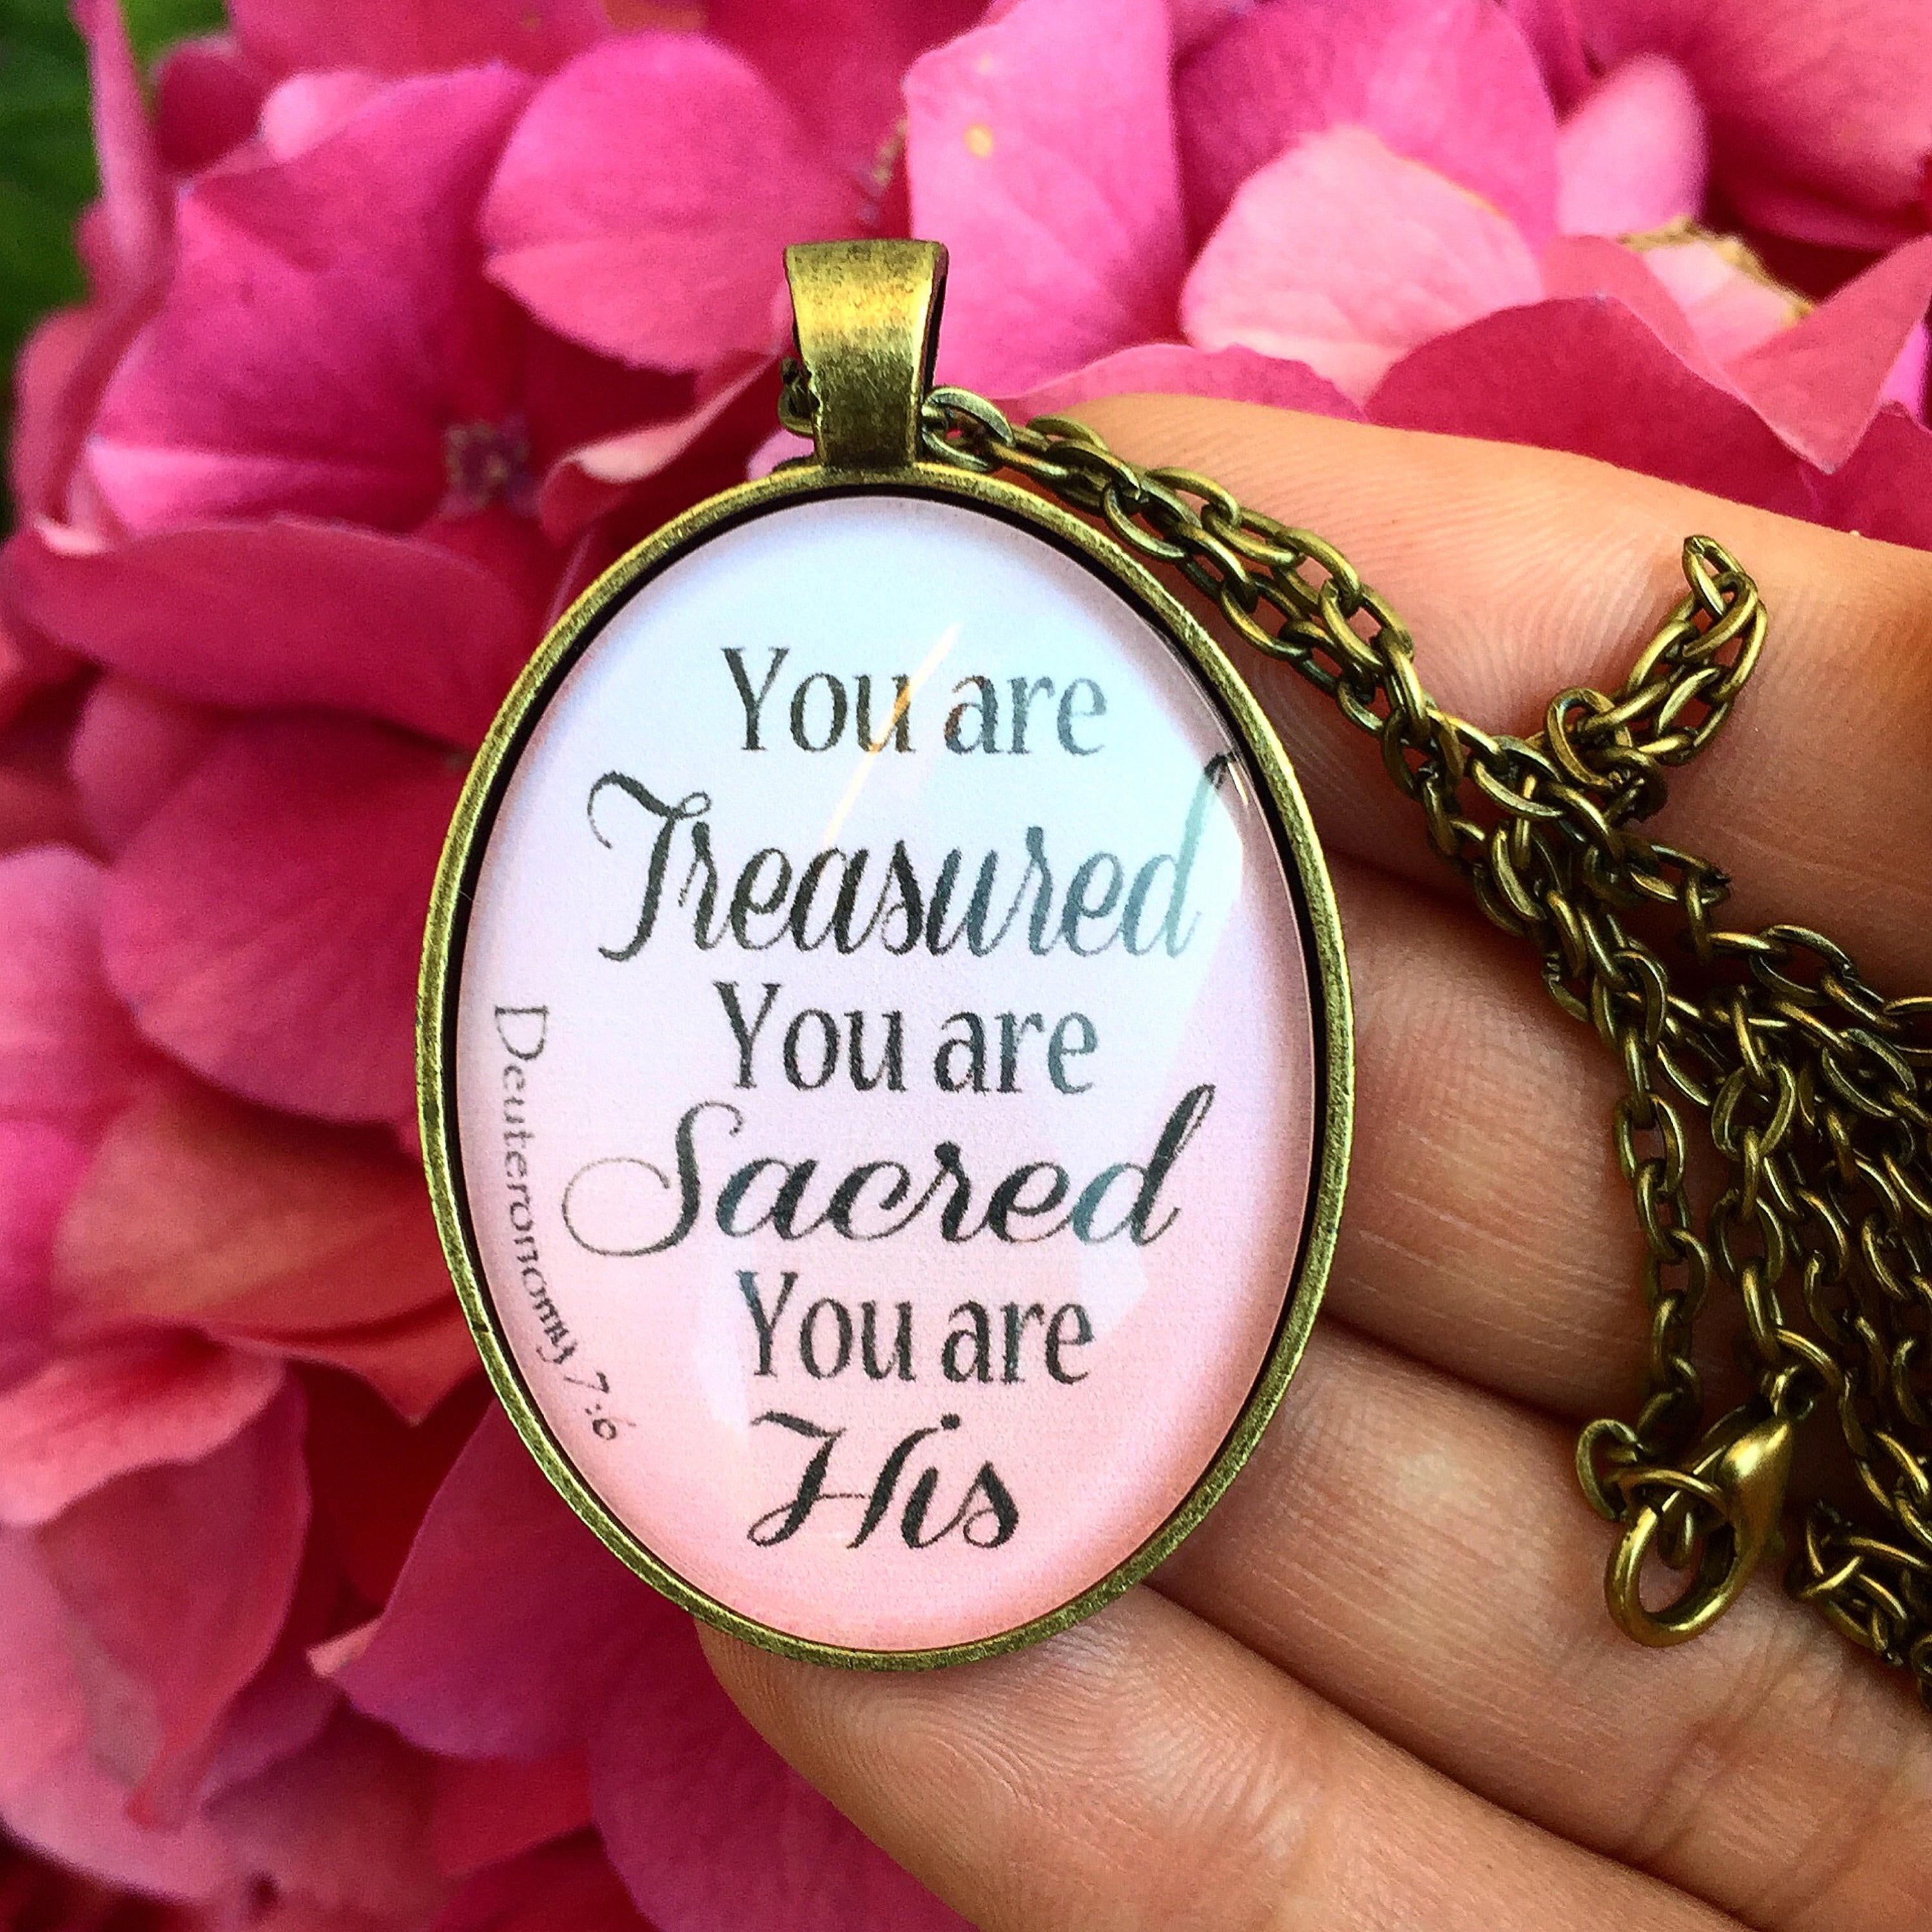 Oval Bible Verse Pendant Necklace "You are Treasured, You are Sacred, You are His. Deuteronomy 7:6" - Redeemed Jewelry